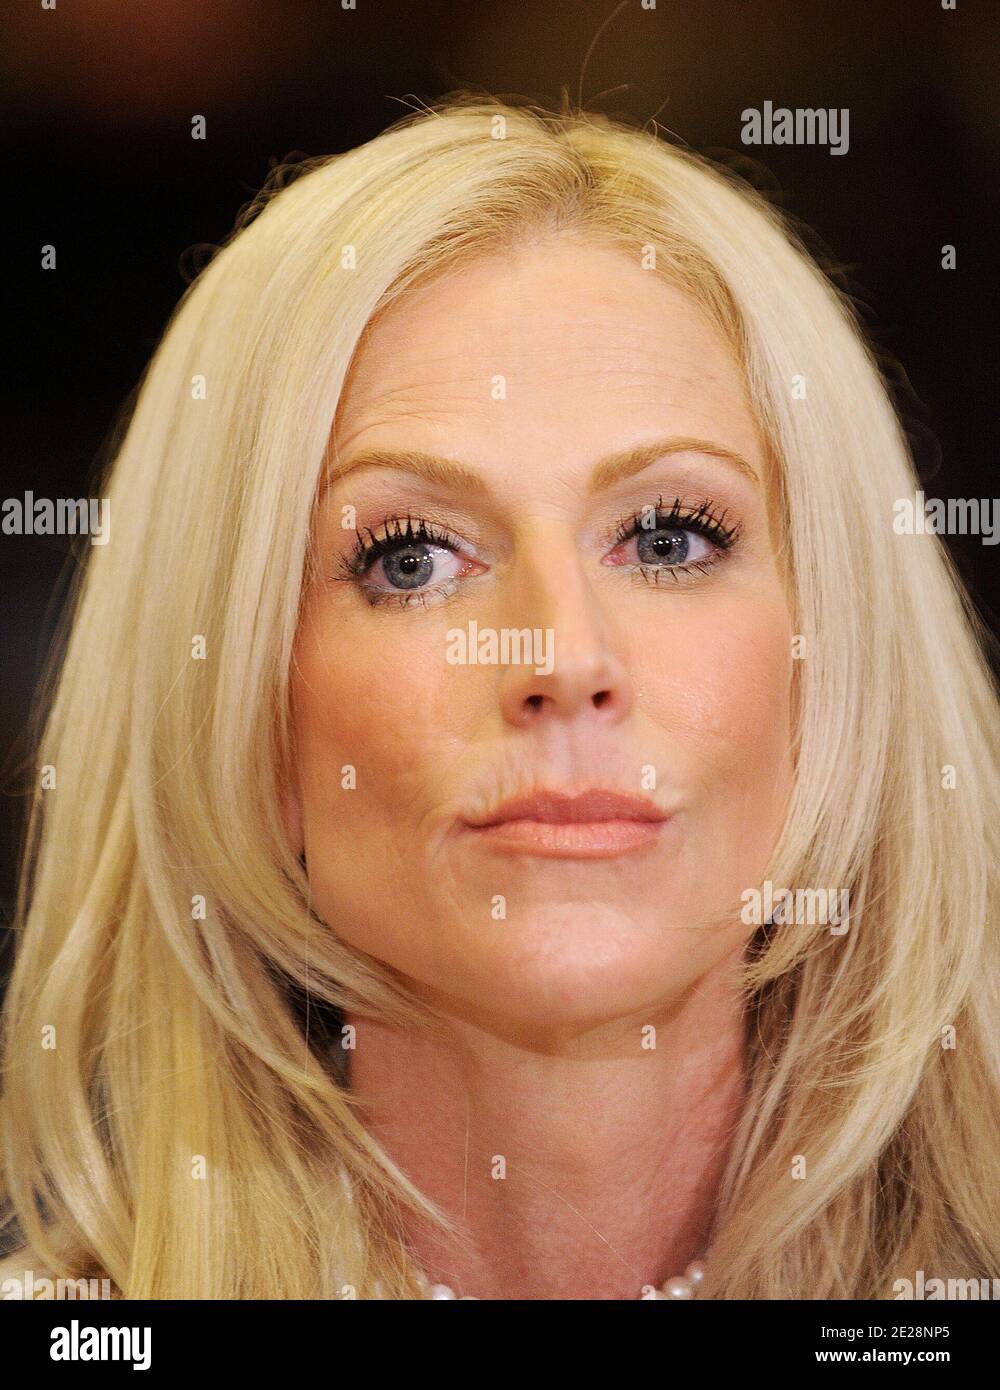 File Photo. Notorious White House party crashers Tareq and Michaele Salahi are reportedly to divorce. After reporting his wife missing, it was discovered that Michaele had left Tareq for Neal Schon, guitarist for the rock band Journey. In this picture Michaele Salahi who have been subpoenaed to testify , attends a hearing on 'The United States Secret Service and Presidential Protection: An Examination of a System Failure' on Capitol Hill, January 20, 2010 in Washington, DC. The Salahis invoke their Fifth Amendment right against self-incrimination rather than testify. Photo by Olivier Douliery/ Stock Photo